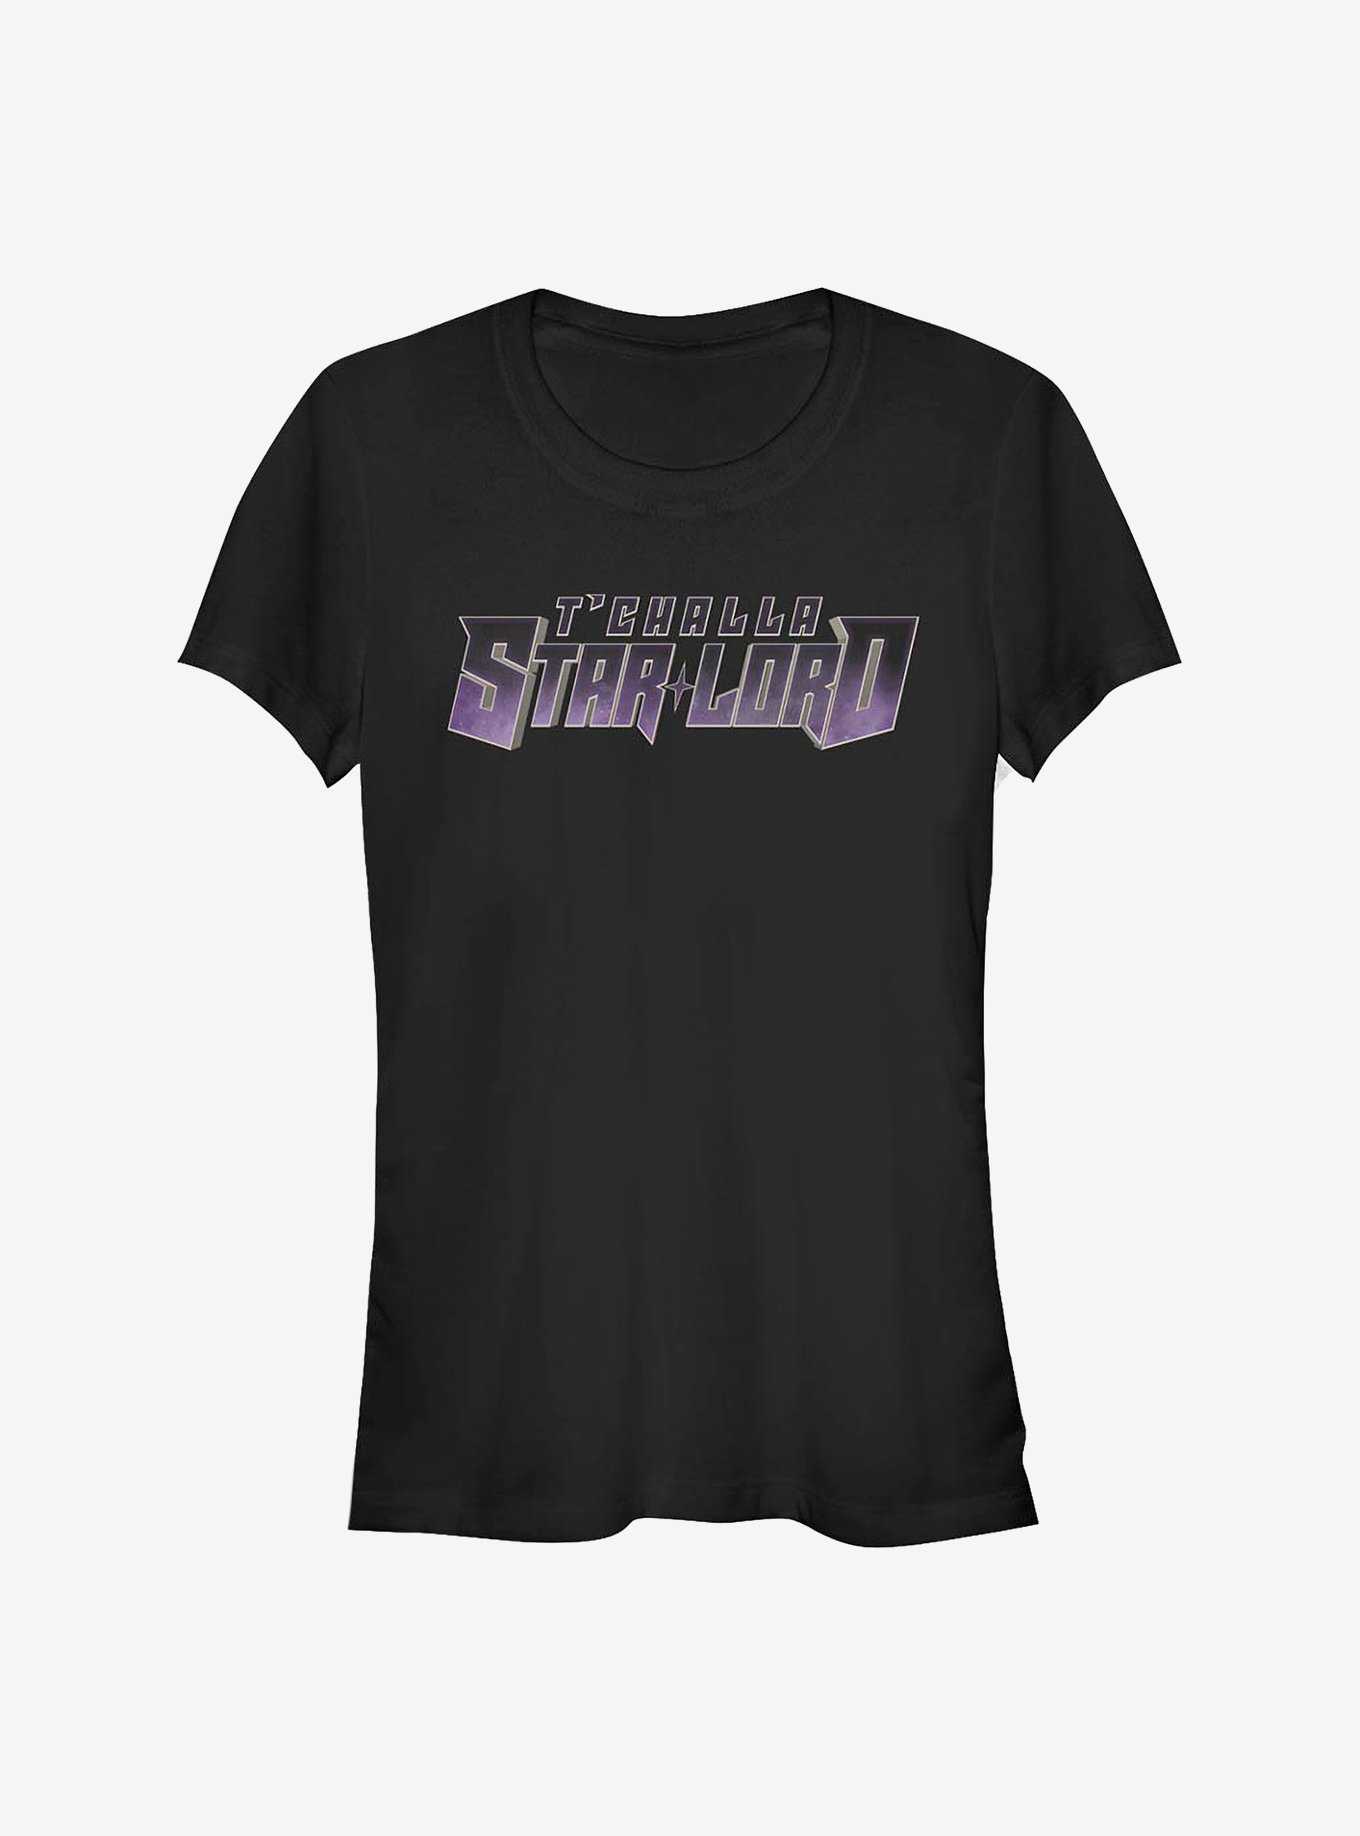 Marvel What If...? T'Challa Was Star-Lord Girls T-Shirt, , hi-res